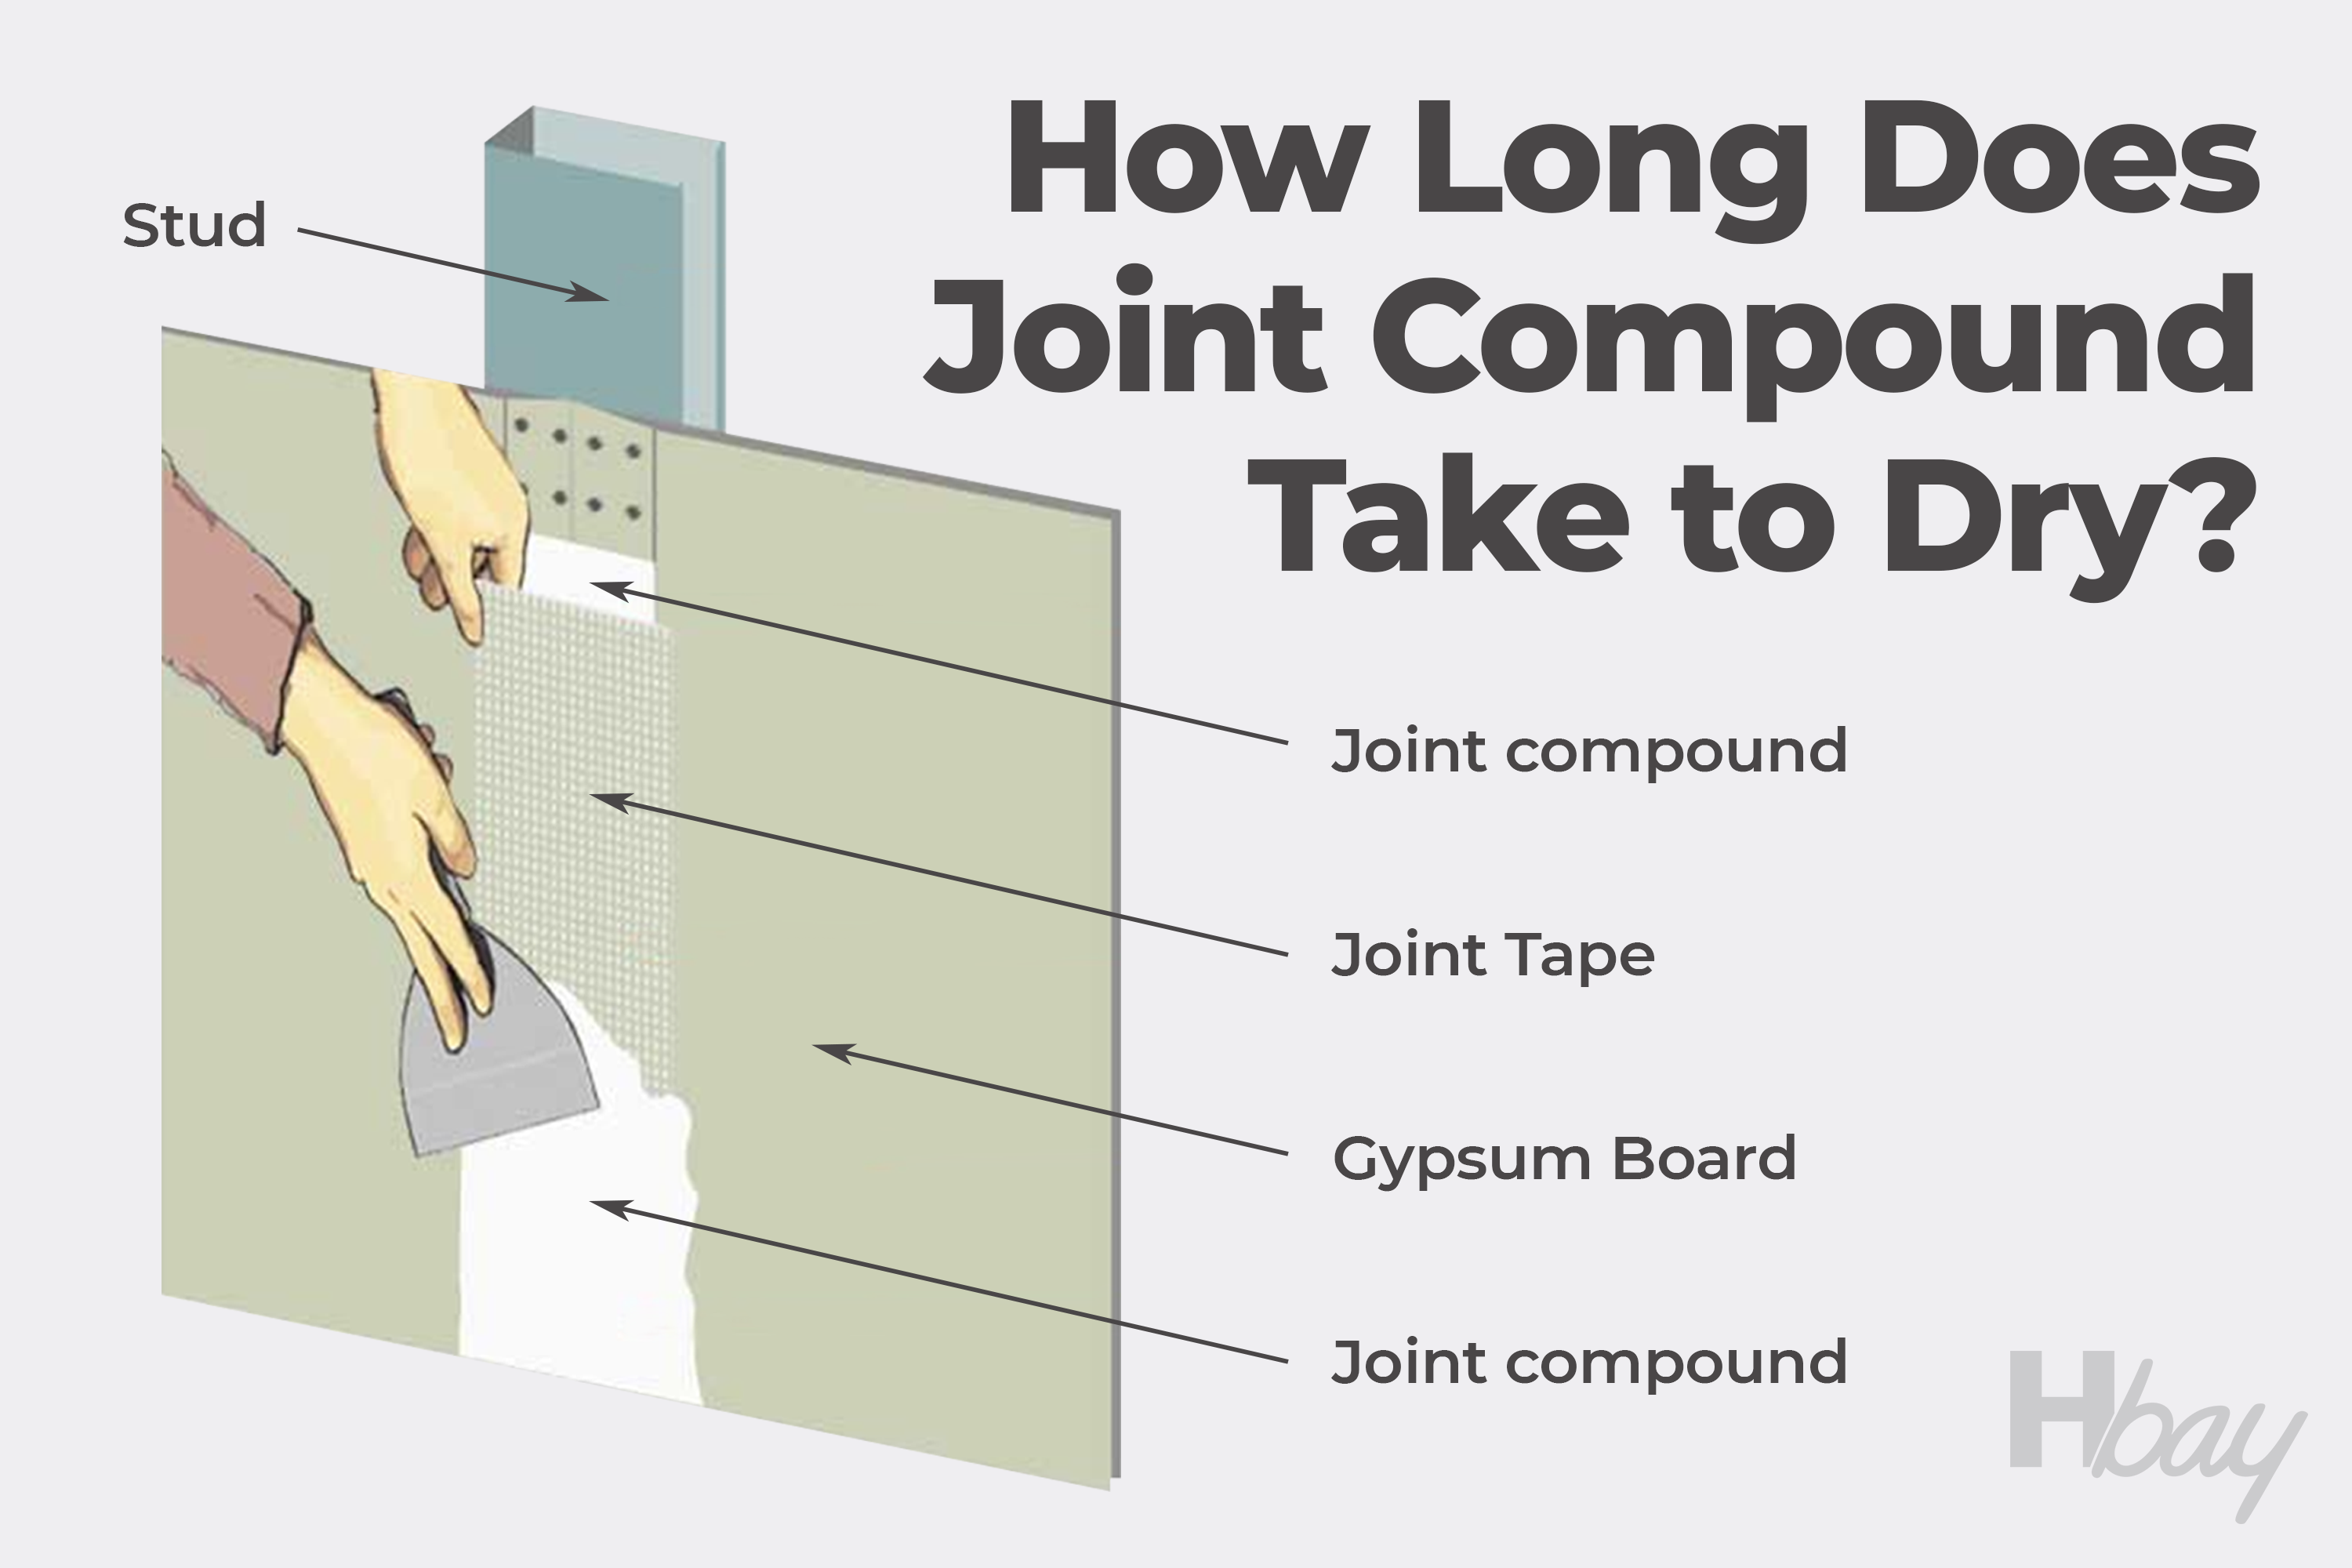 How Long Does It Take a Joint Compound to Dry